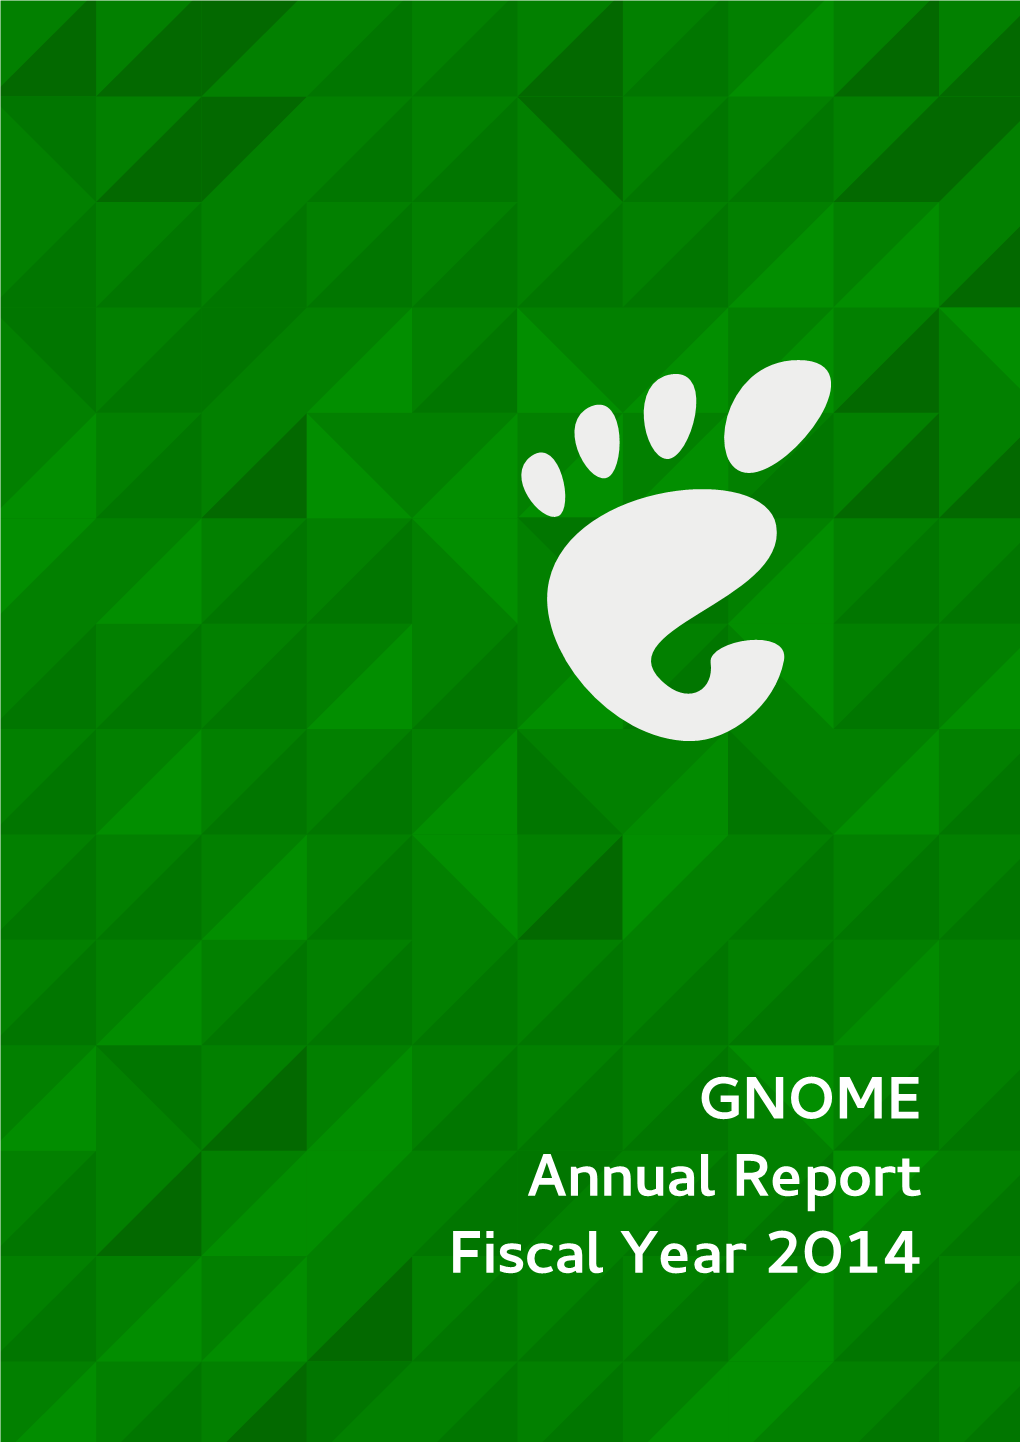 GNOME Annual Report Fiscal Year 2014